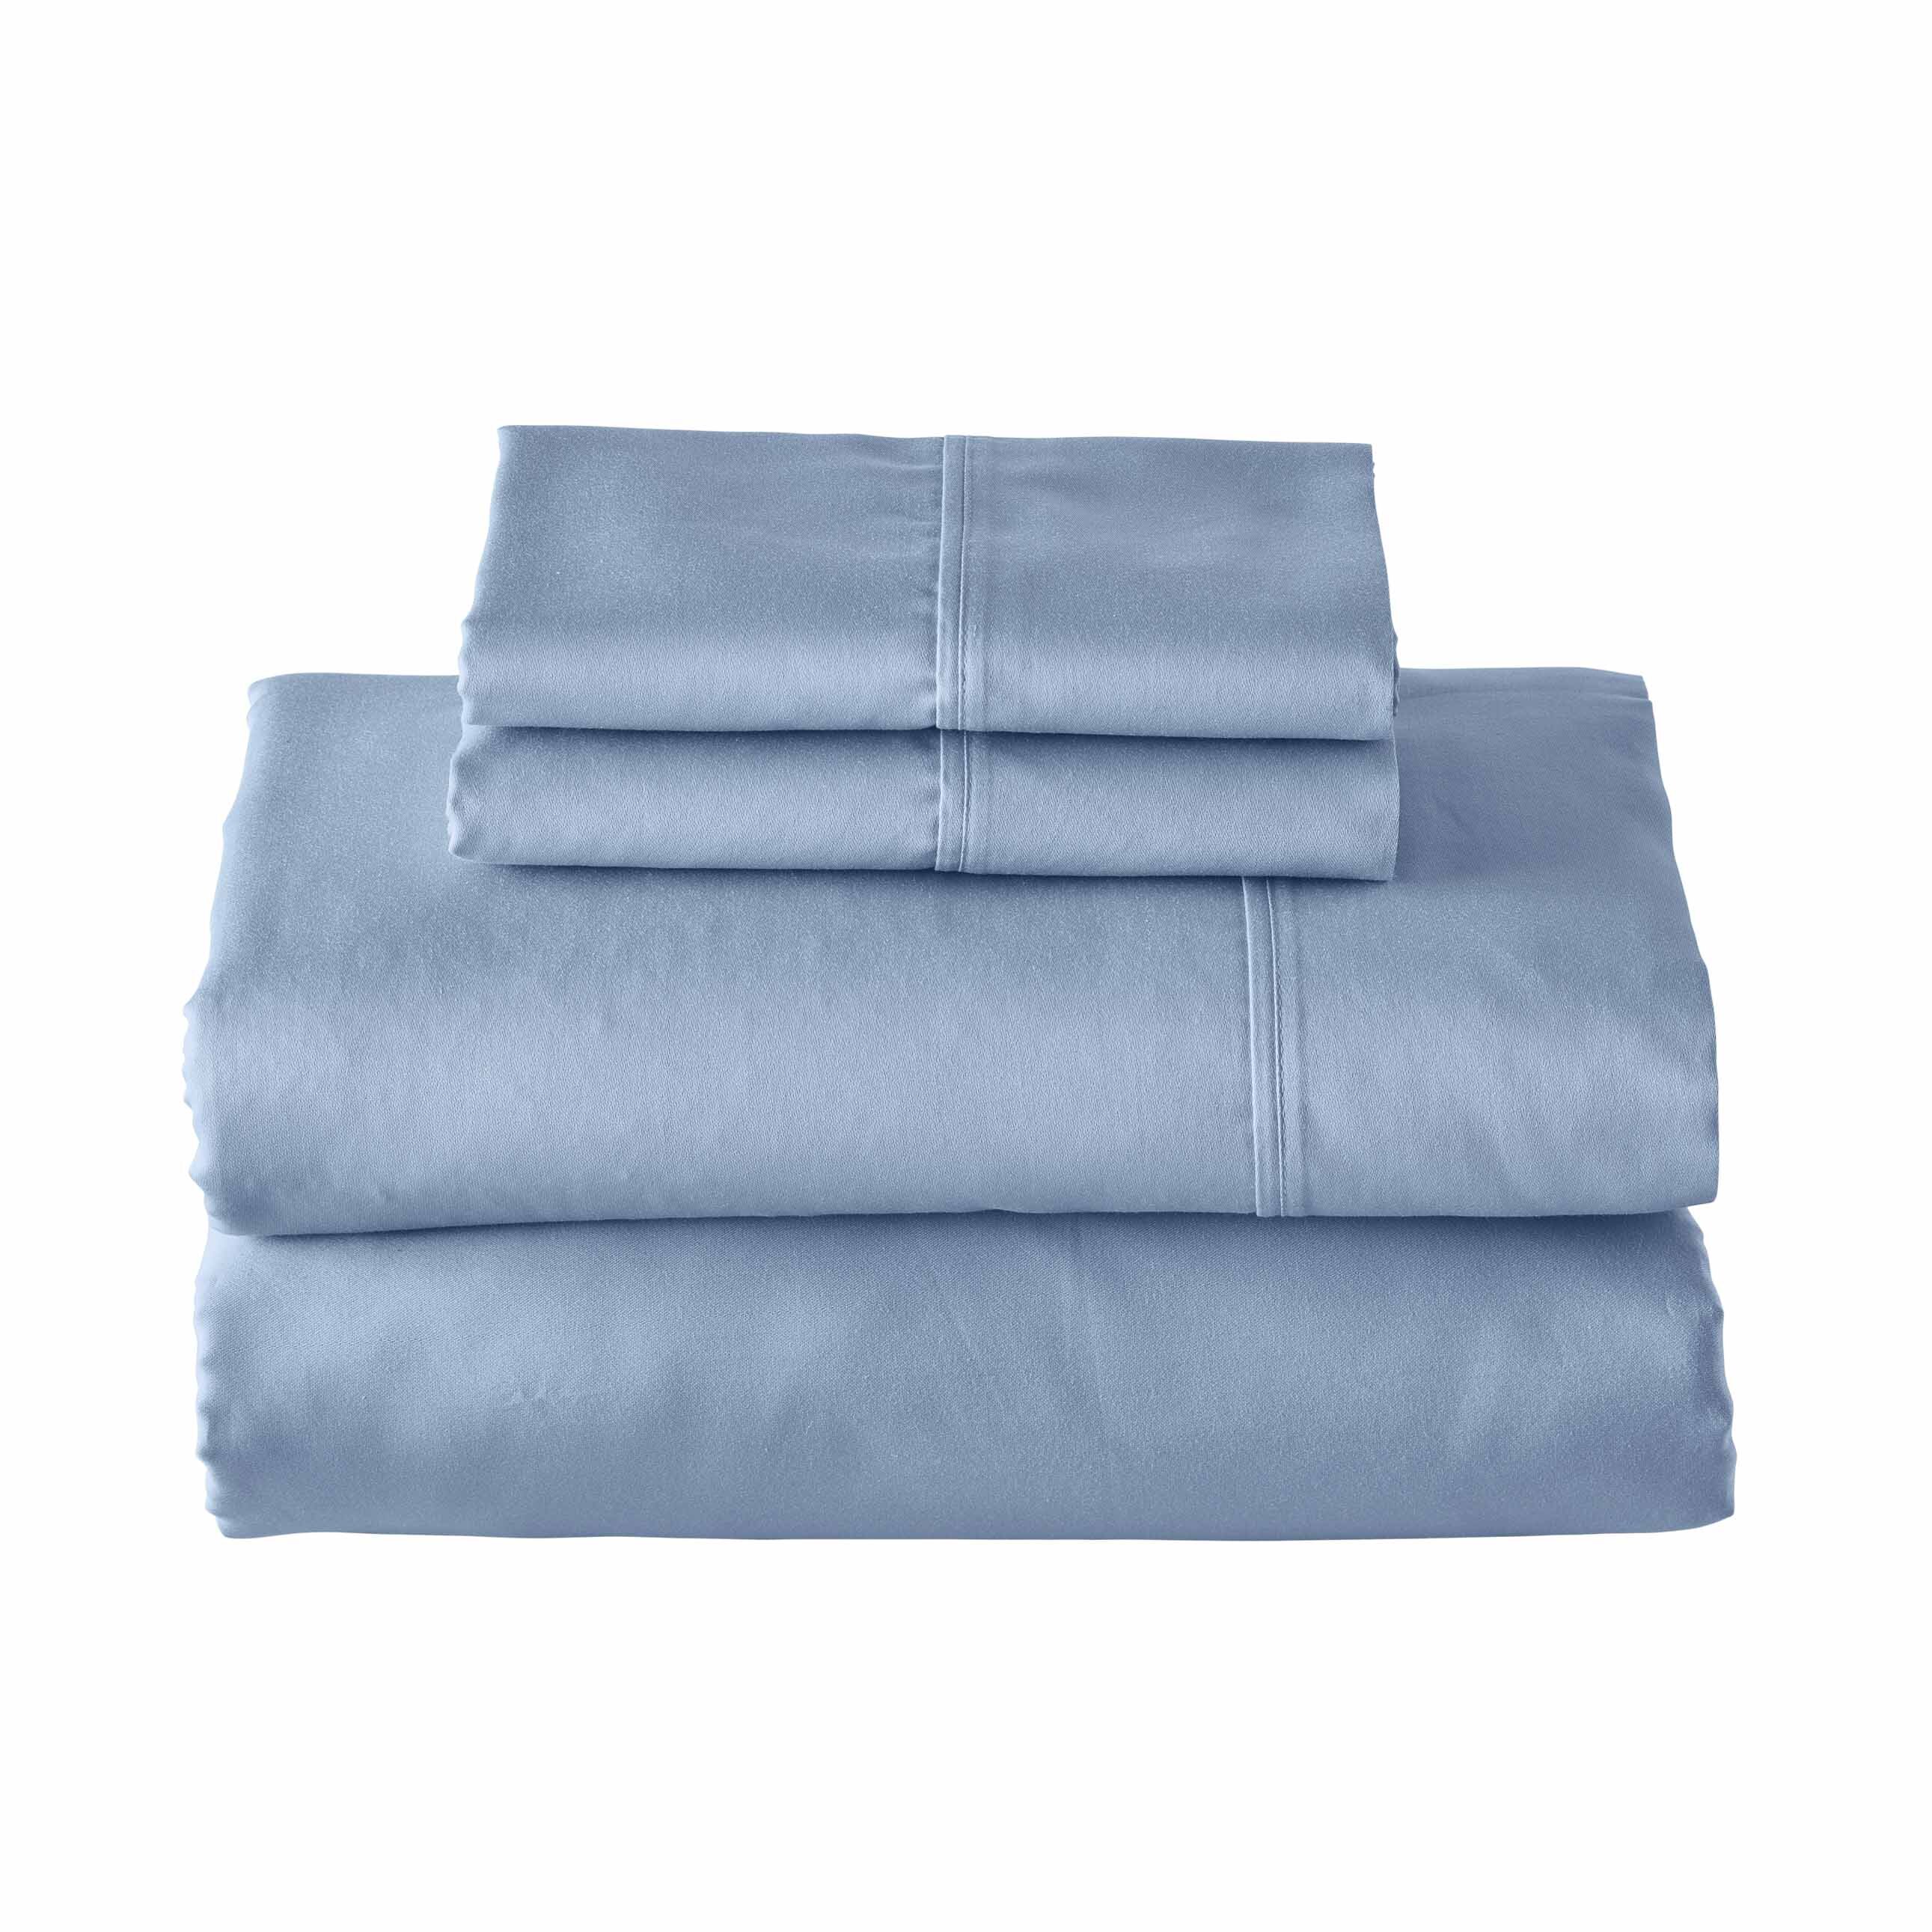 Better Homes & Gardens 100% Cotton Sateen 300 Thread Count Sheet Set, Full, Blue Water - image 5 of 6